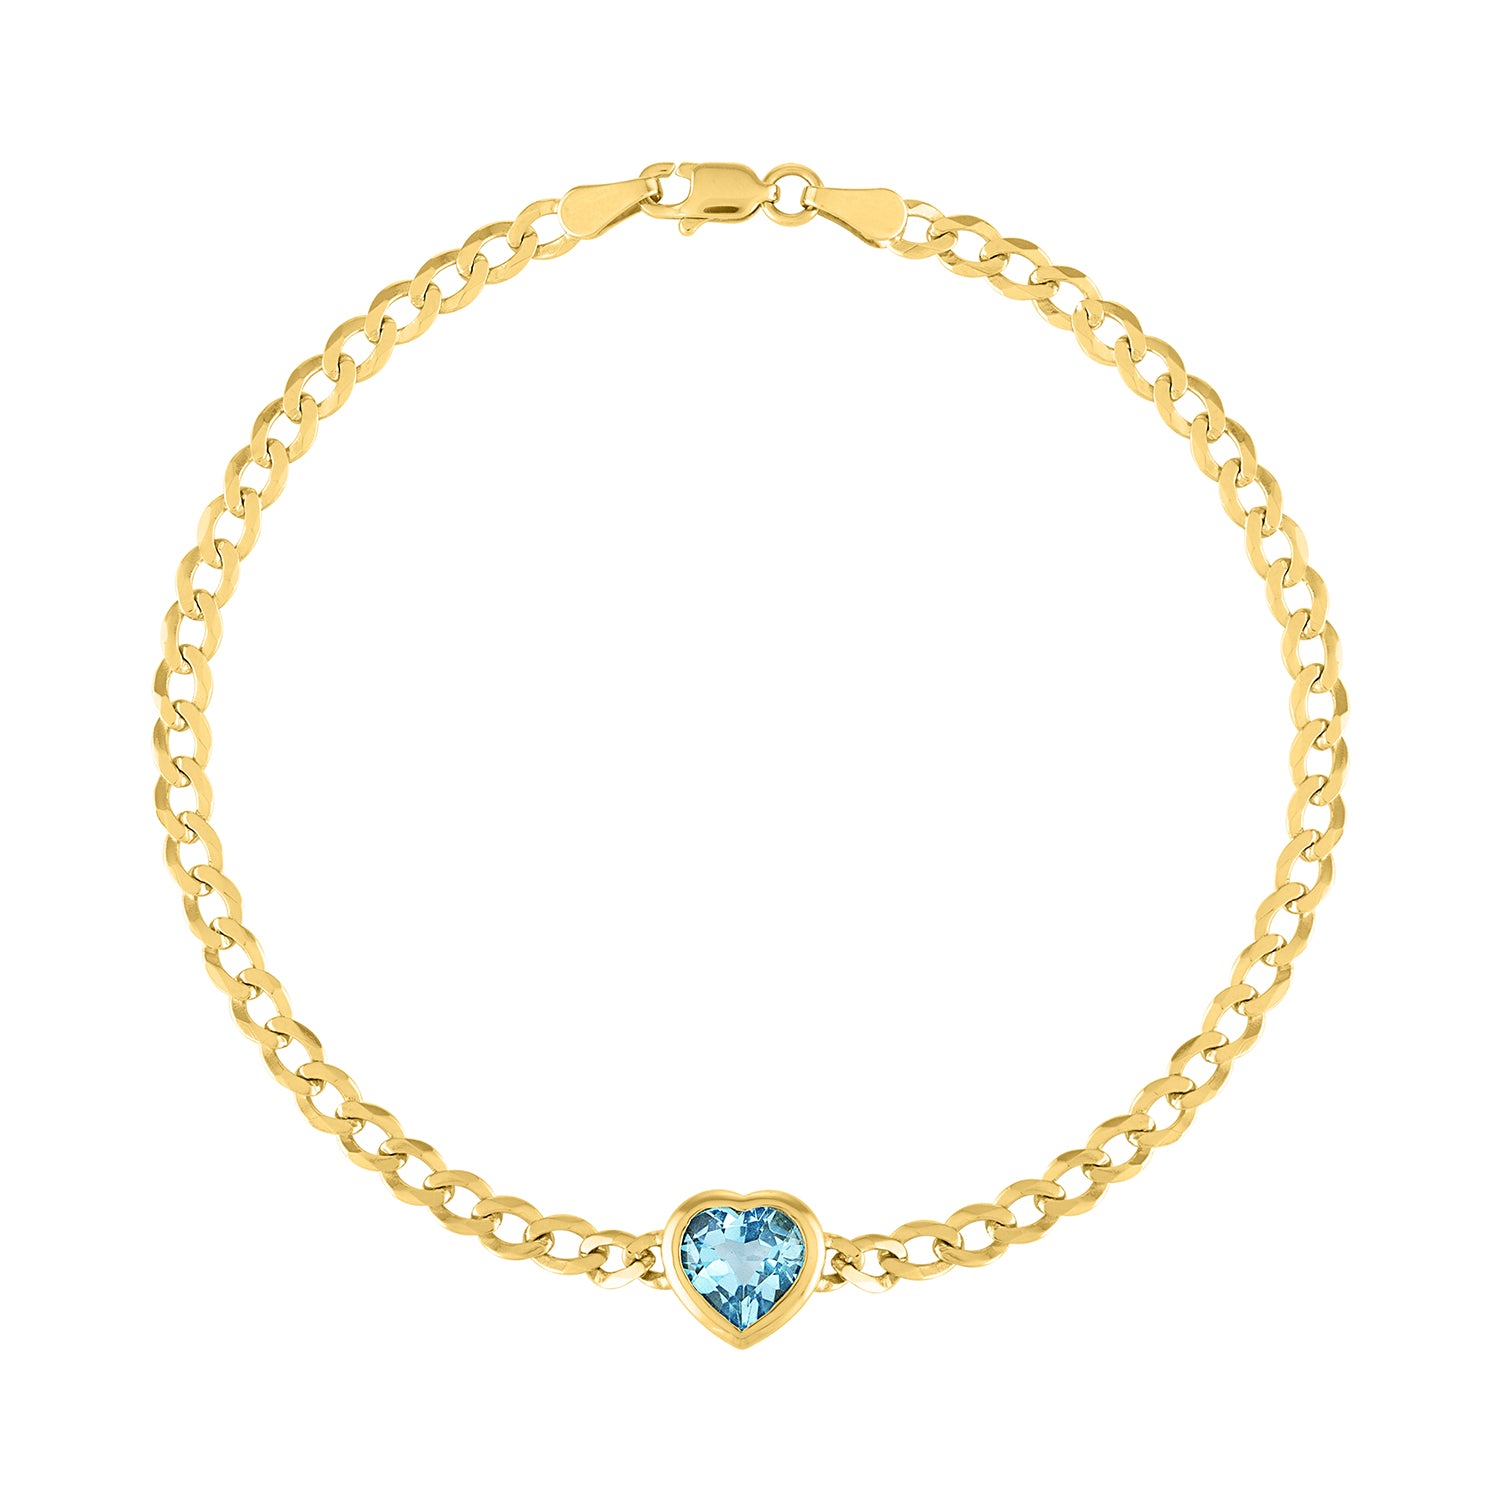 Yellow gold cuban link chain bracelet with a heart shaped bezeled blue topaz in the center. 